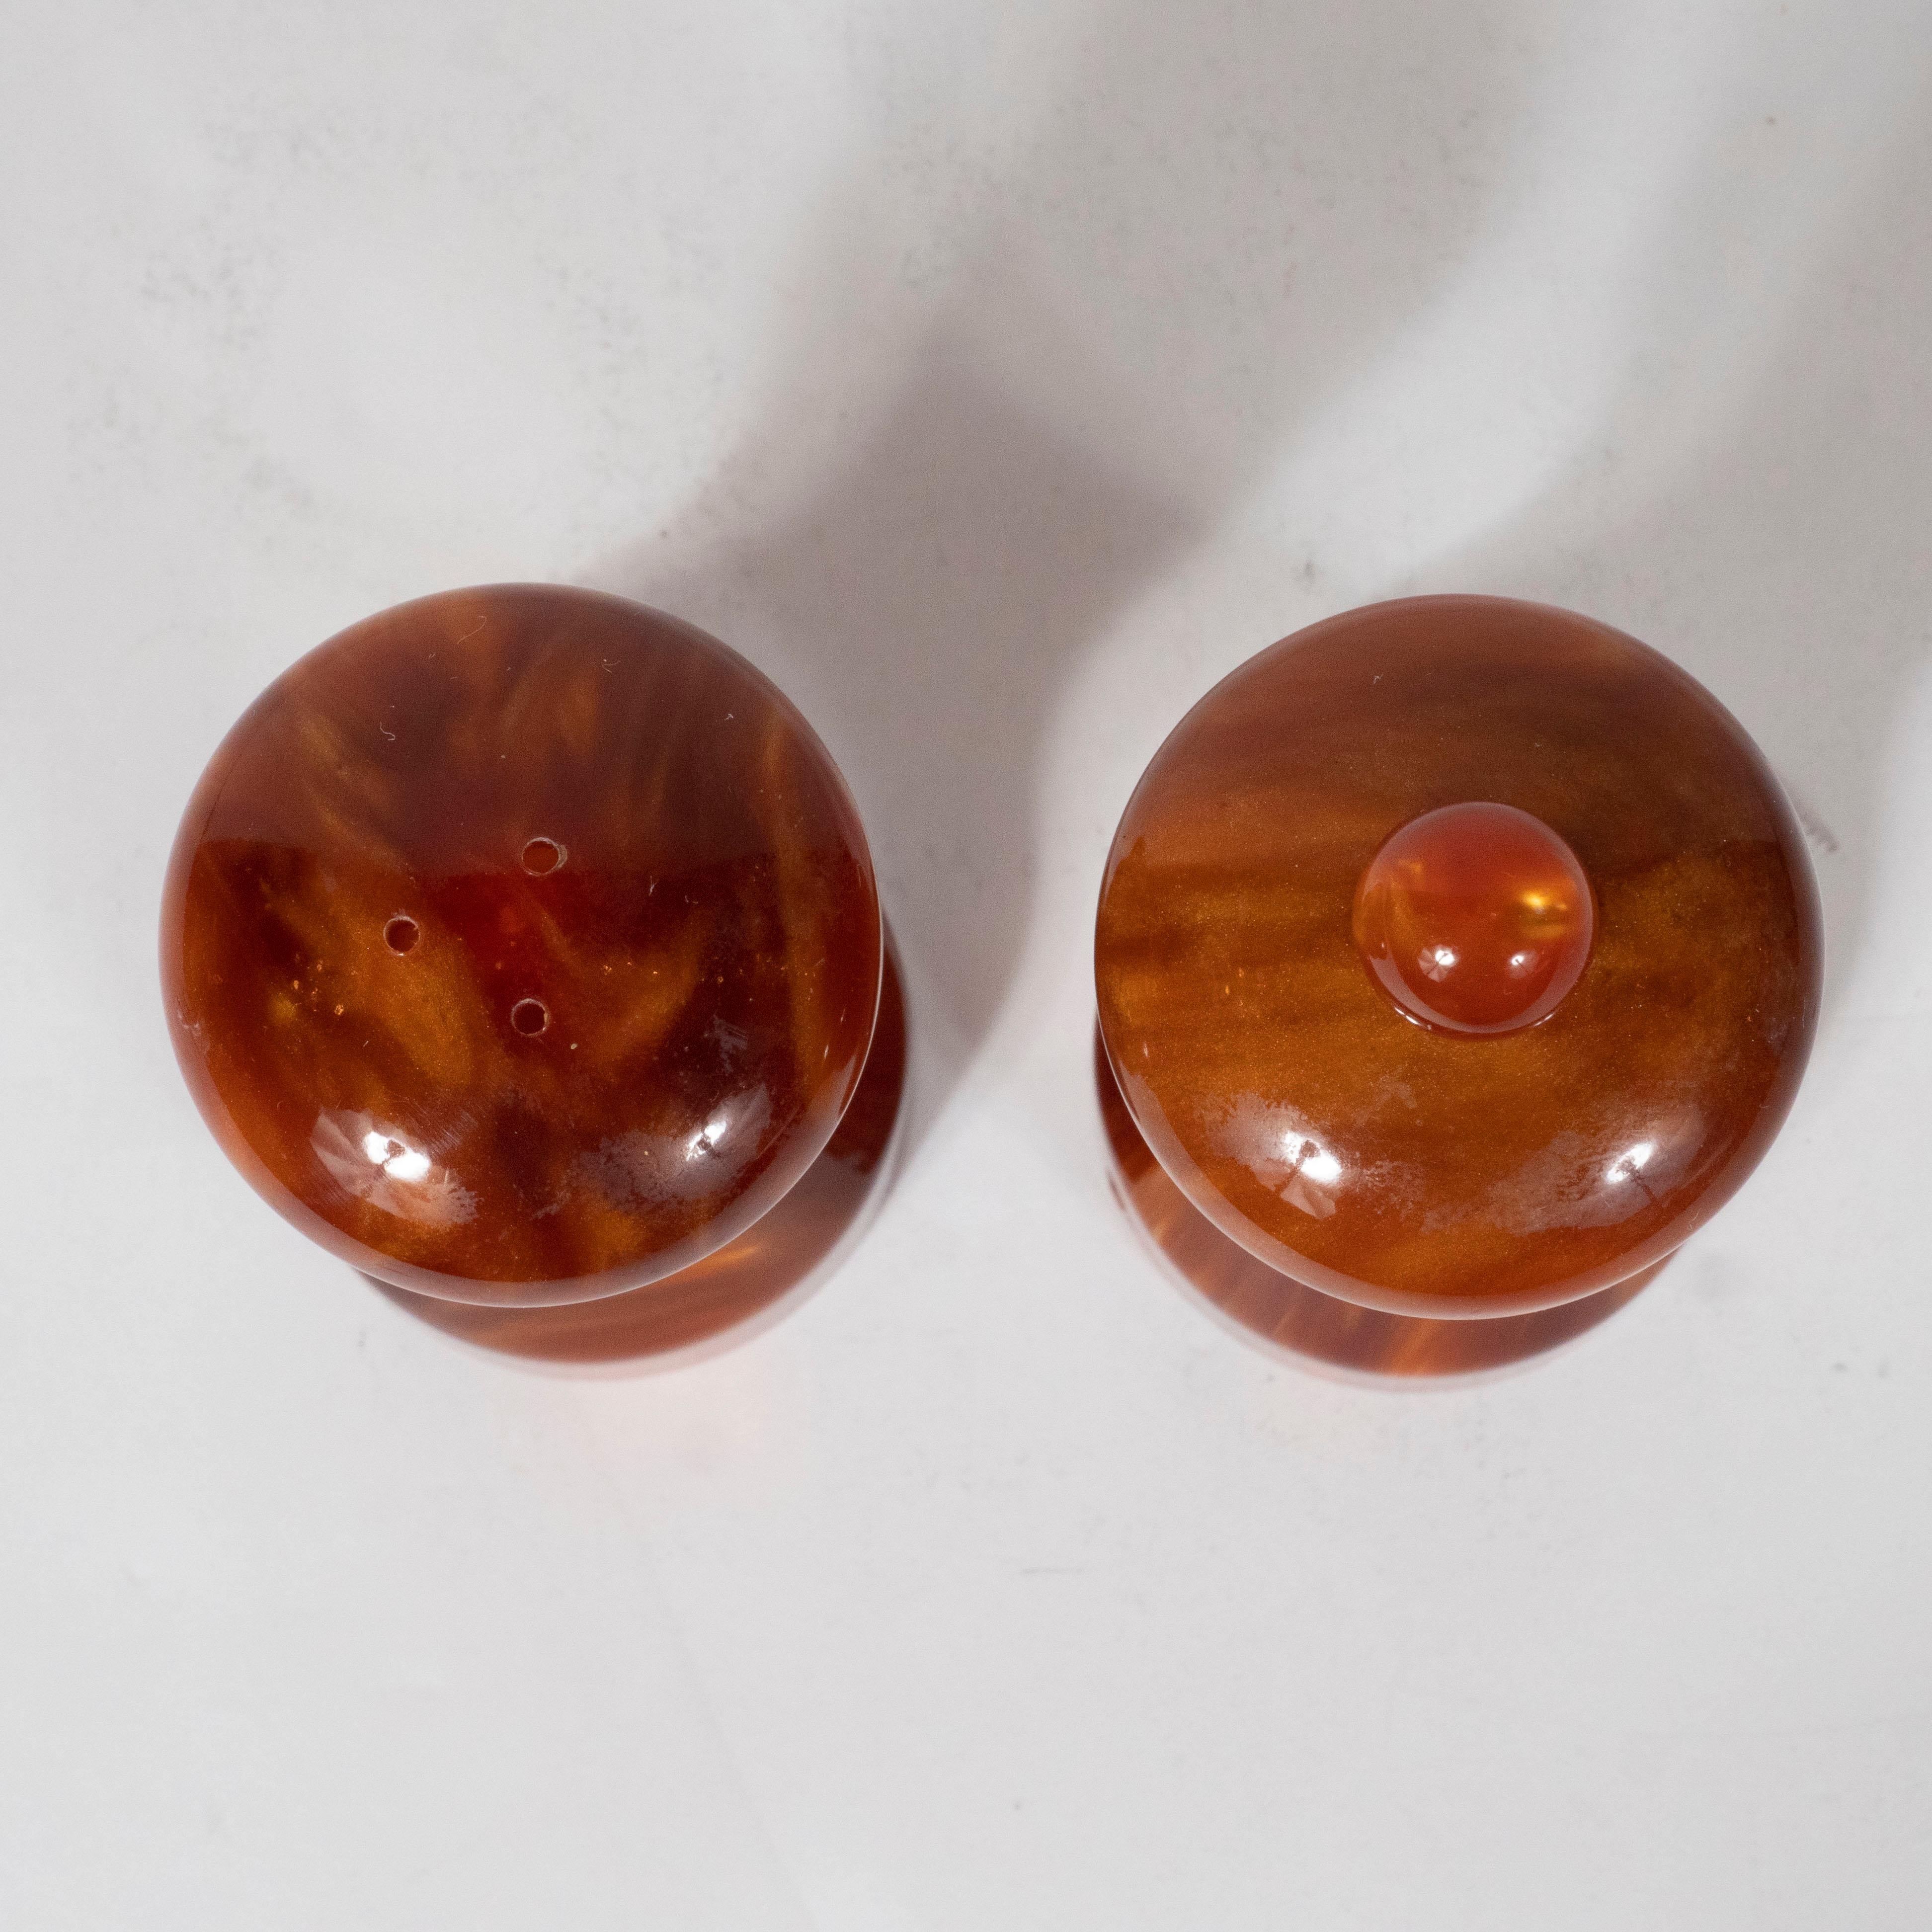 This elegant Mid-Century Modern salt and pepper Shaker set were realized in France circa 1960 by the esteemed maker Au Bain Marie. They feature sinuously curved bodies realized in a mottled tortoiseshell bakelite offering honeyed and amber tones.